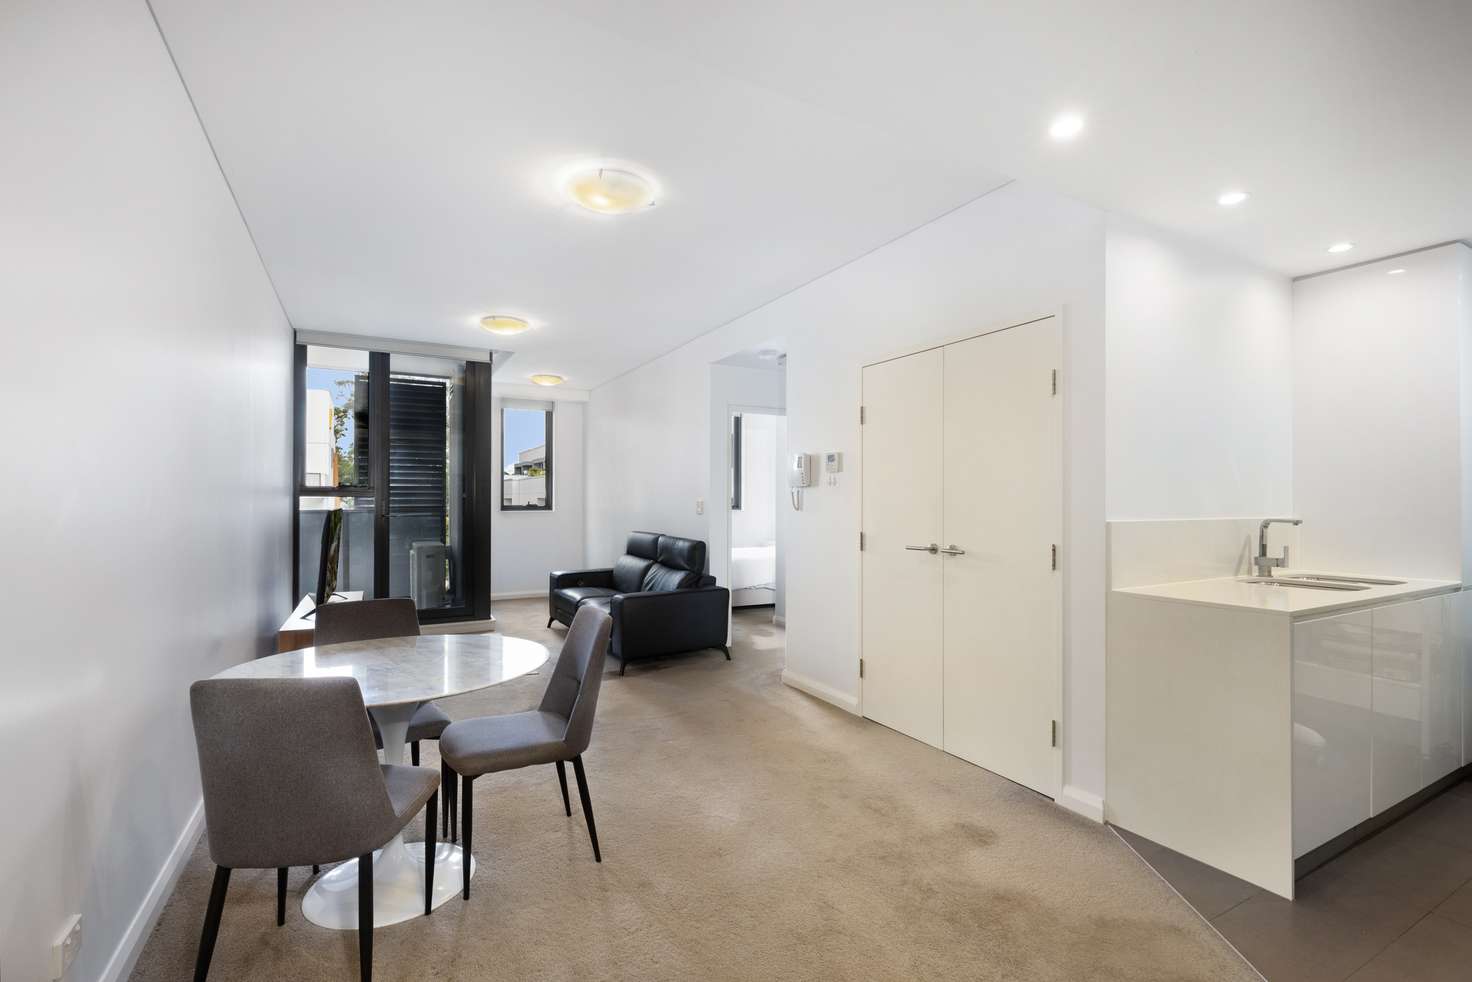 Main view of Homely apartment listing, 110/11C Mashman Avenue, Kingsgrove NSW 2208